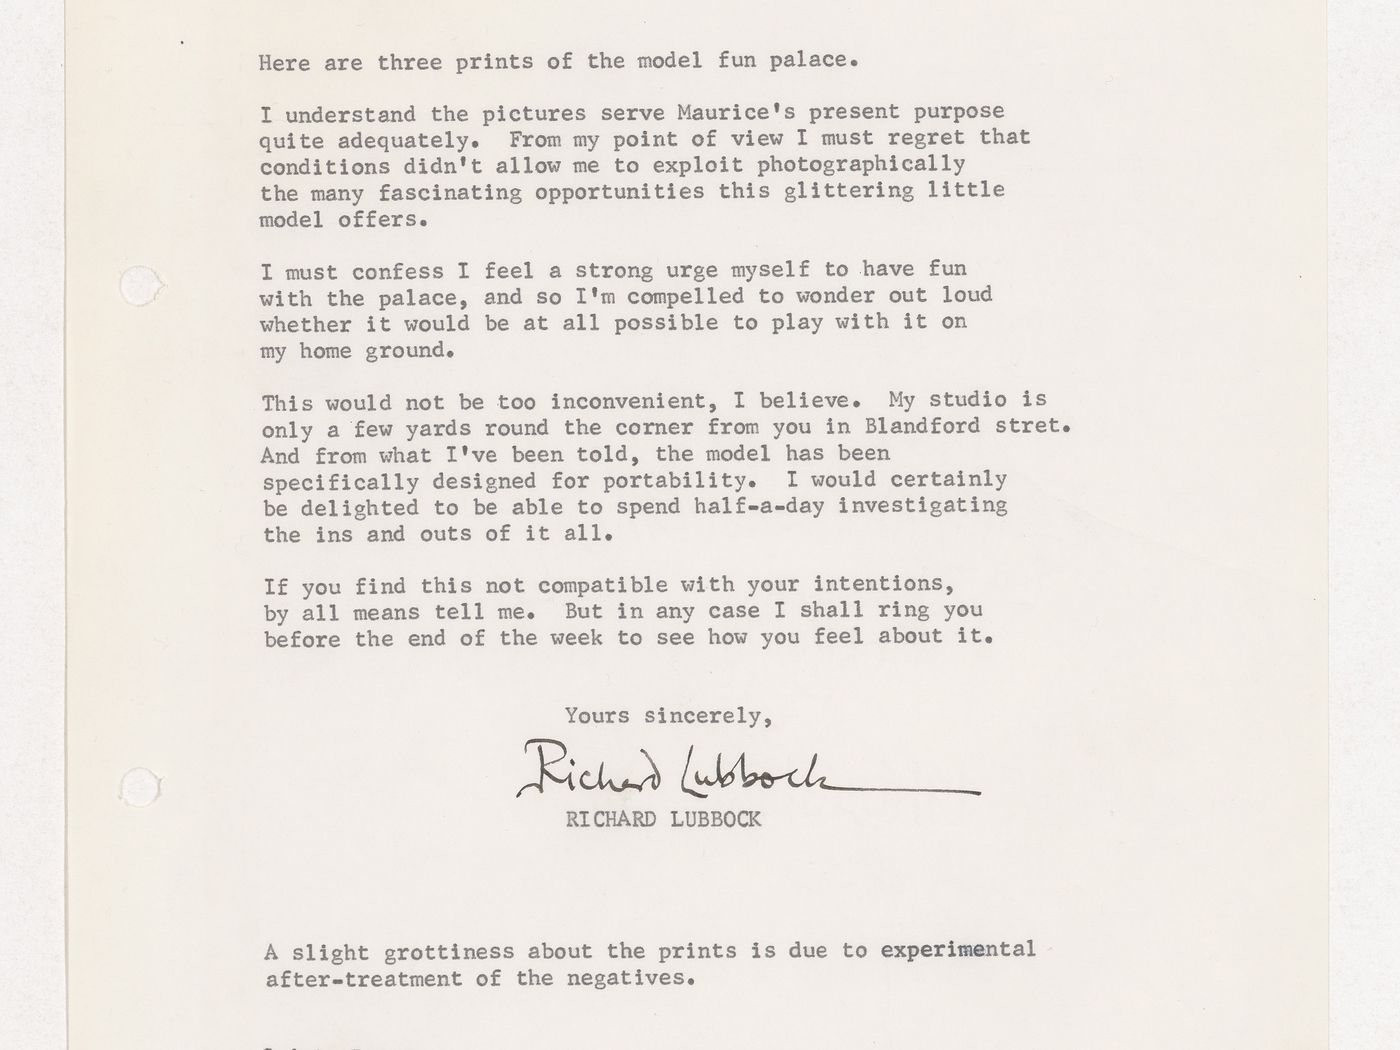 Letter from Richard Lubbock of Colman Lubbock Photographs to Cedric Price regarding photos of the Fun Palace Project